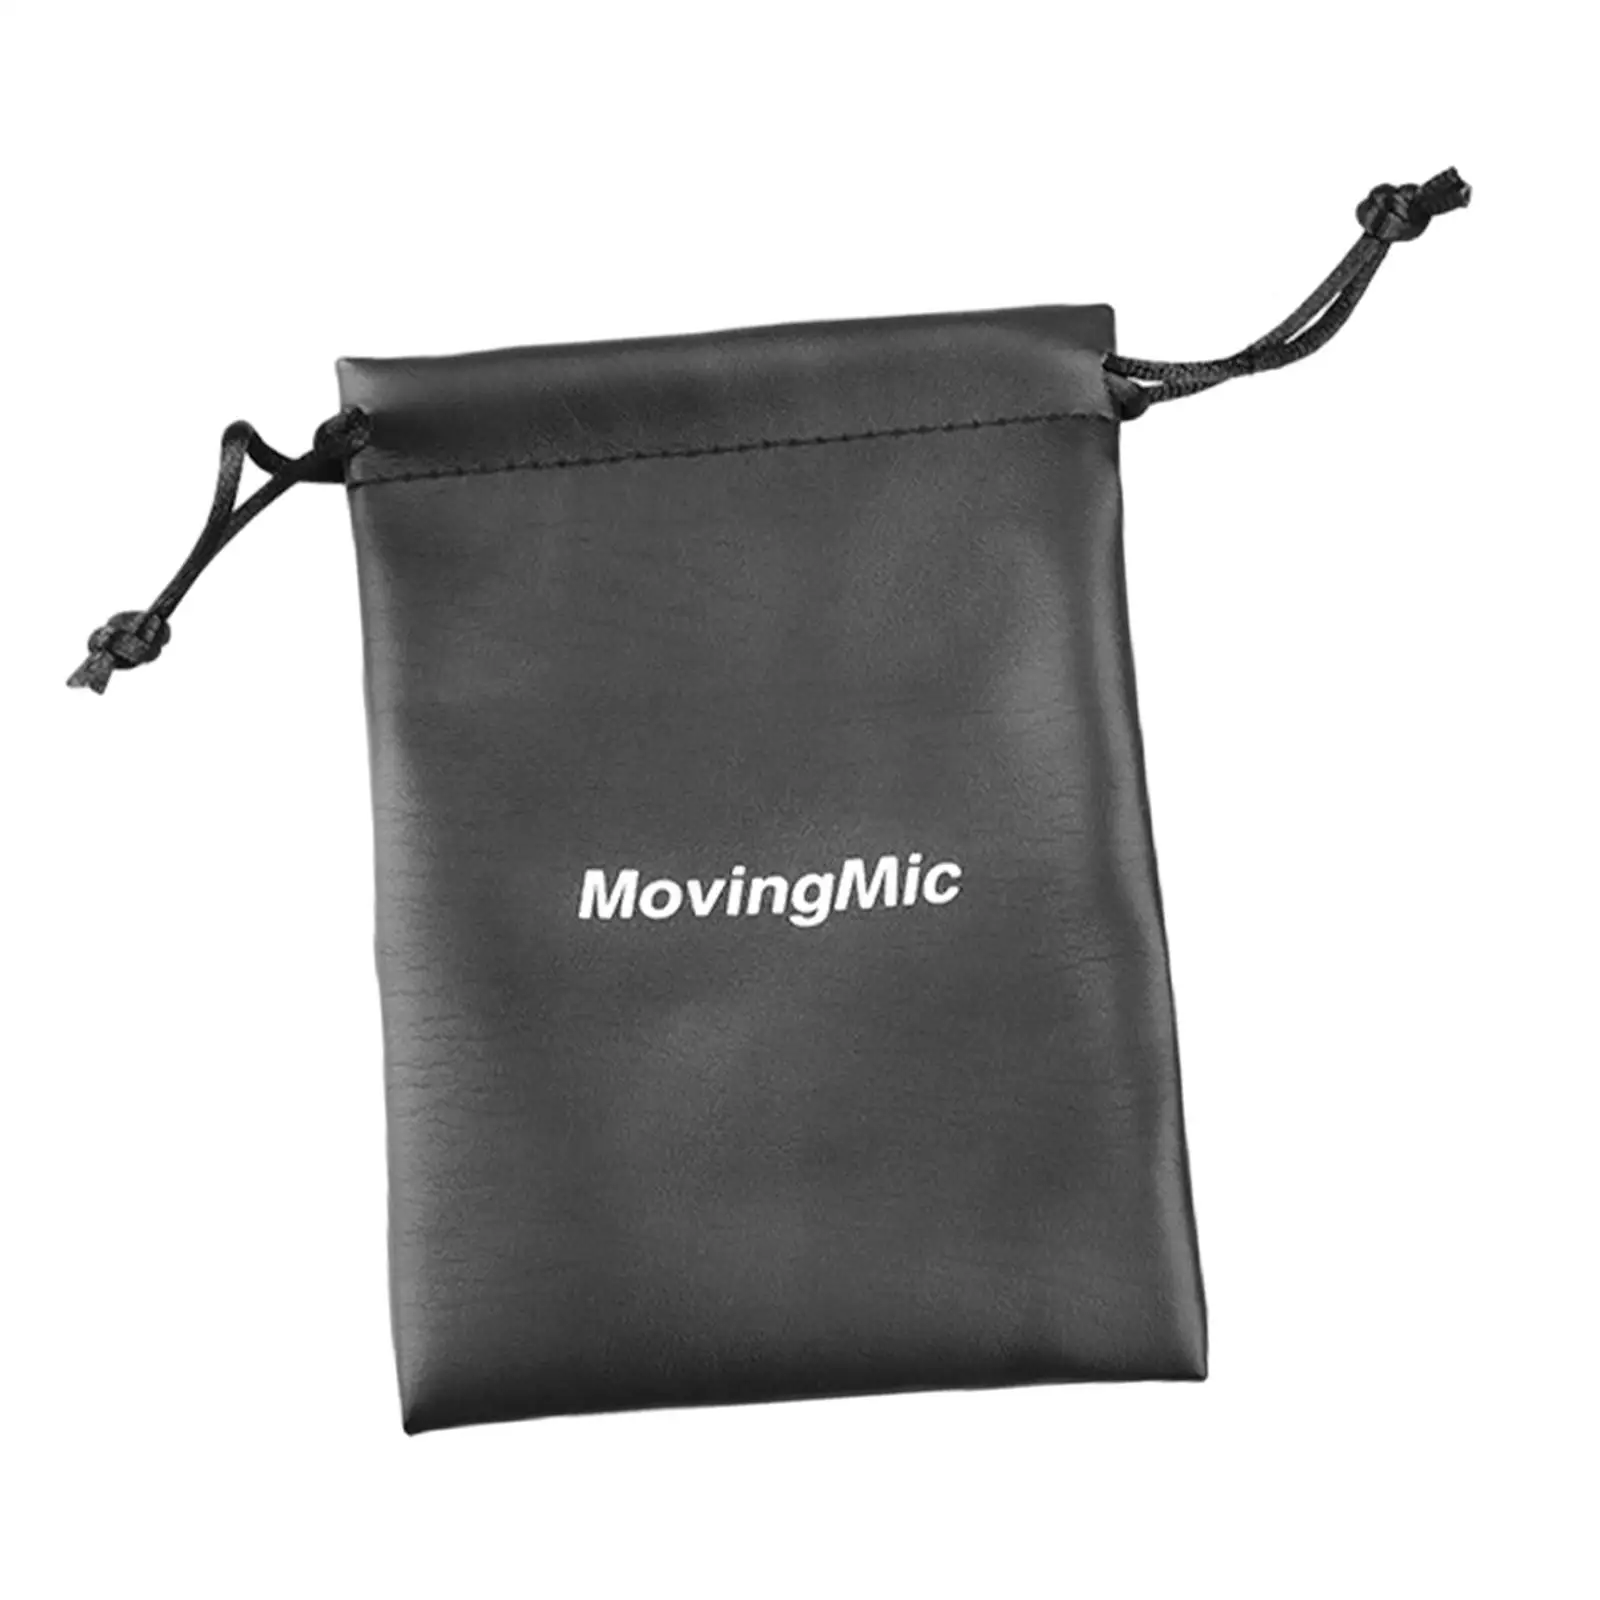 2 Pieces Storage Pouch Waterproof Water Resistant Single Microphone Microphone Cover Portable Carrying Case for Camping Travel